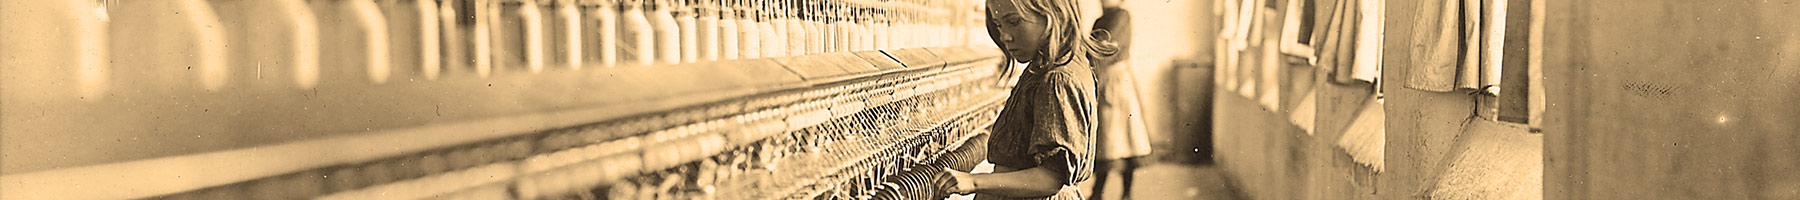 a young girl working in the Lancaster Cotton Mills